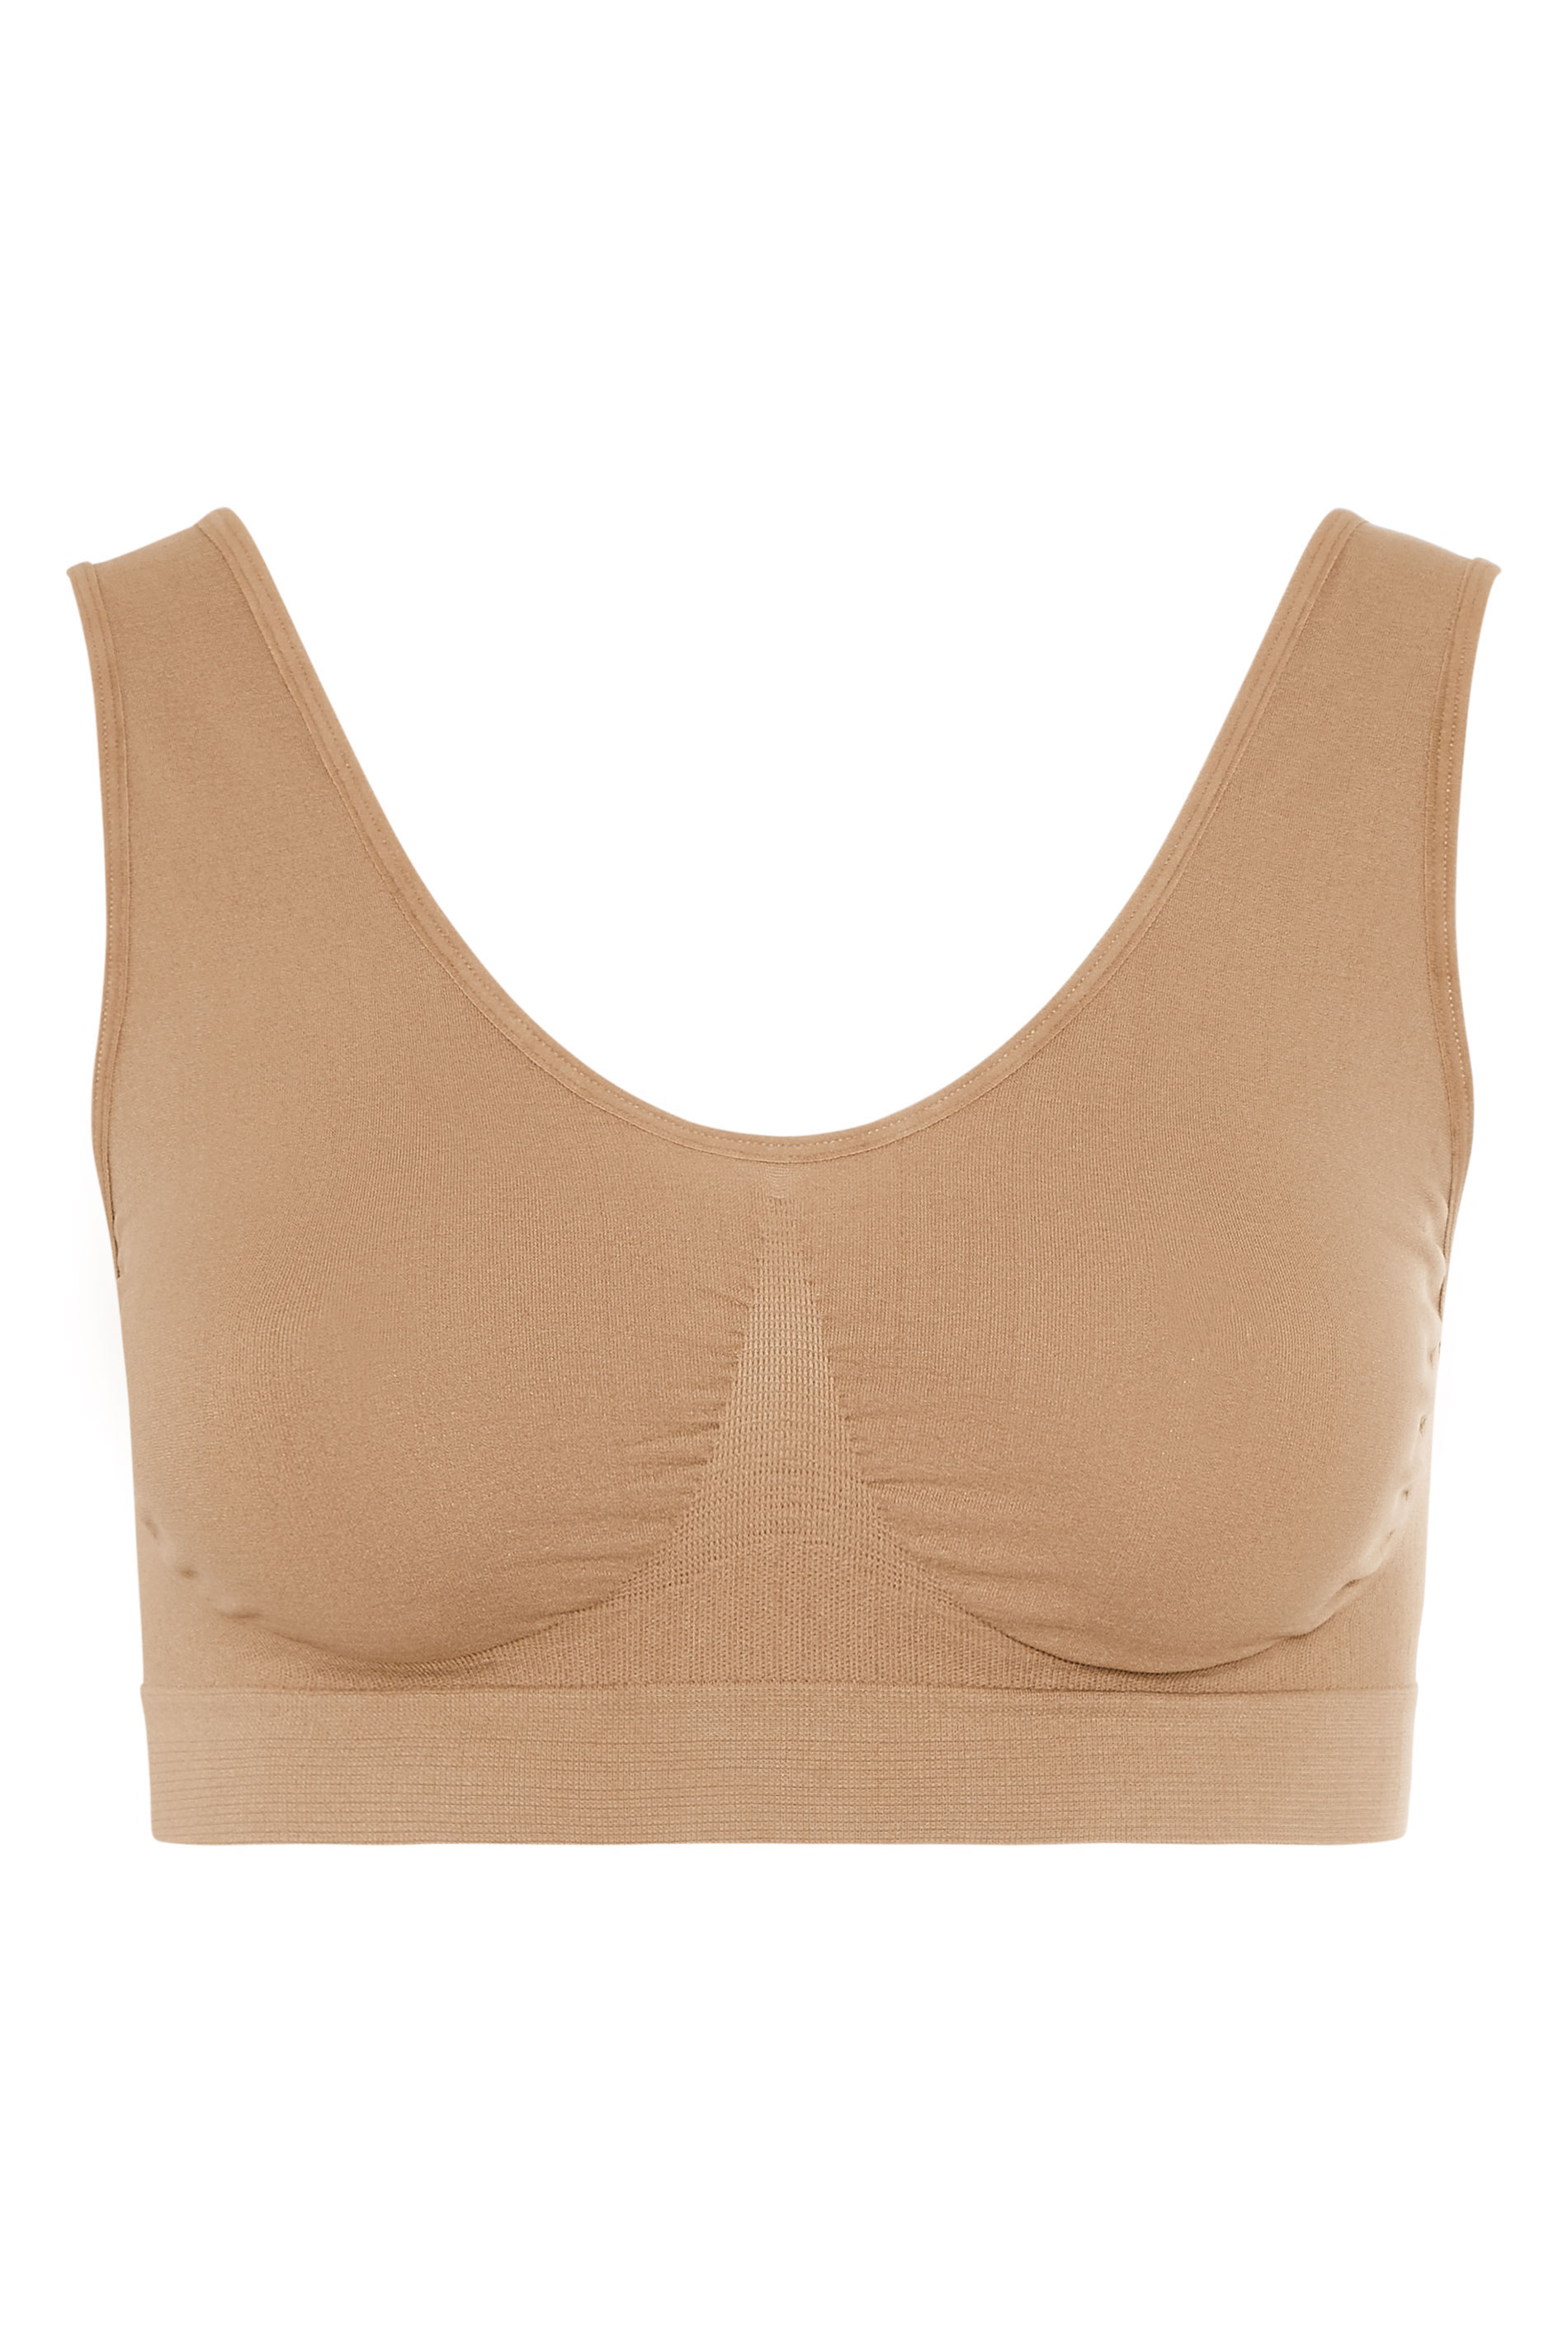 Plus Size Brown Seamless Padded Non-Wired Bralette